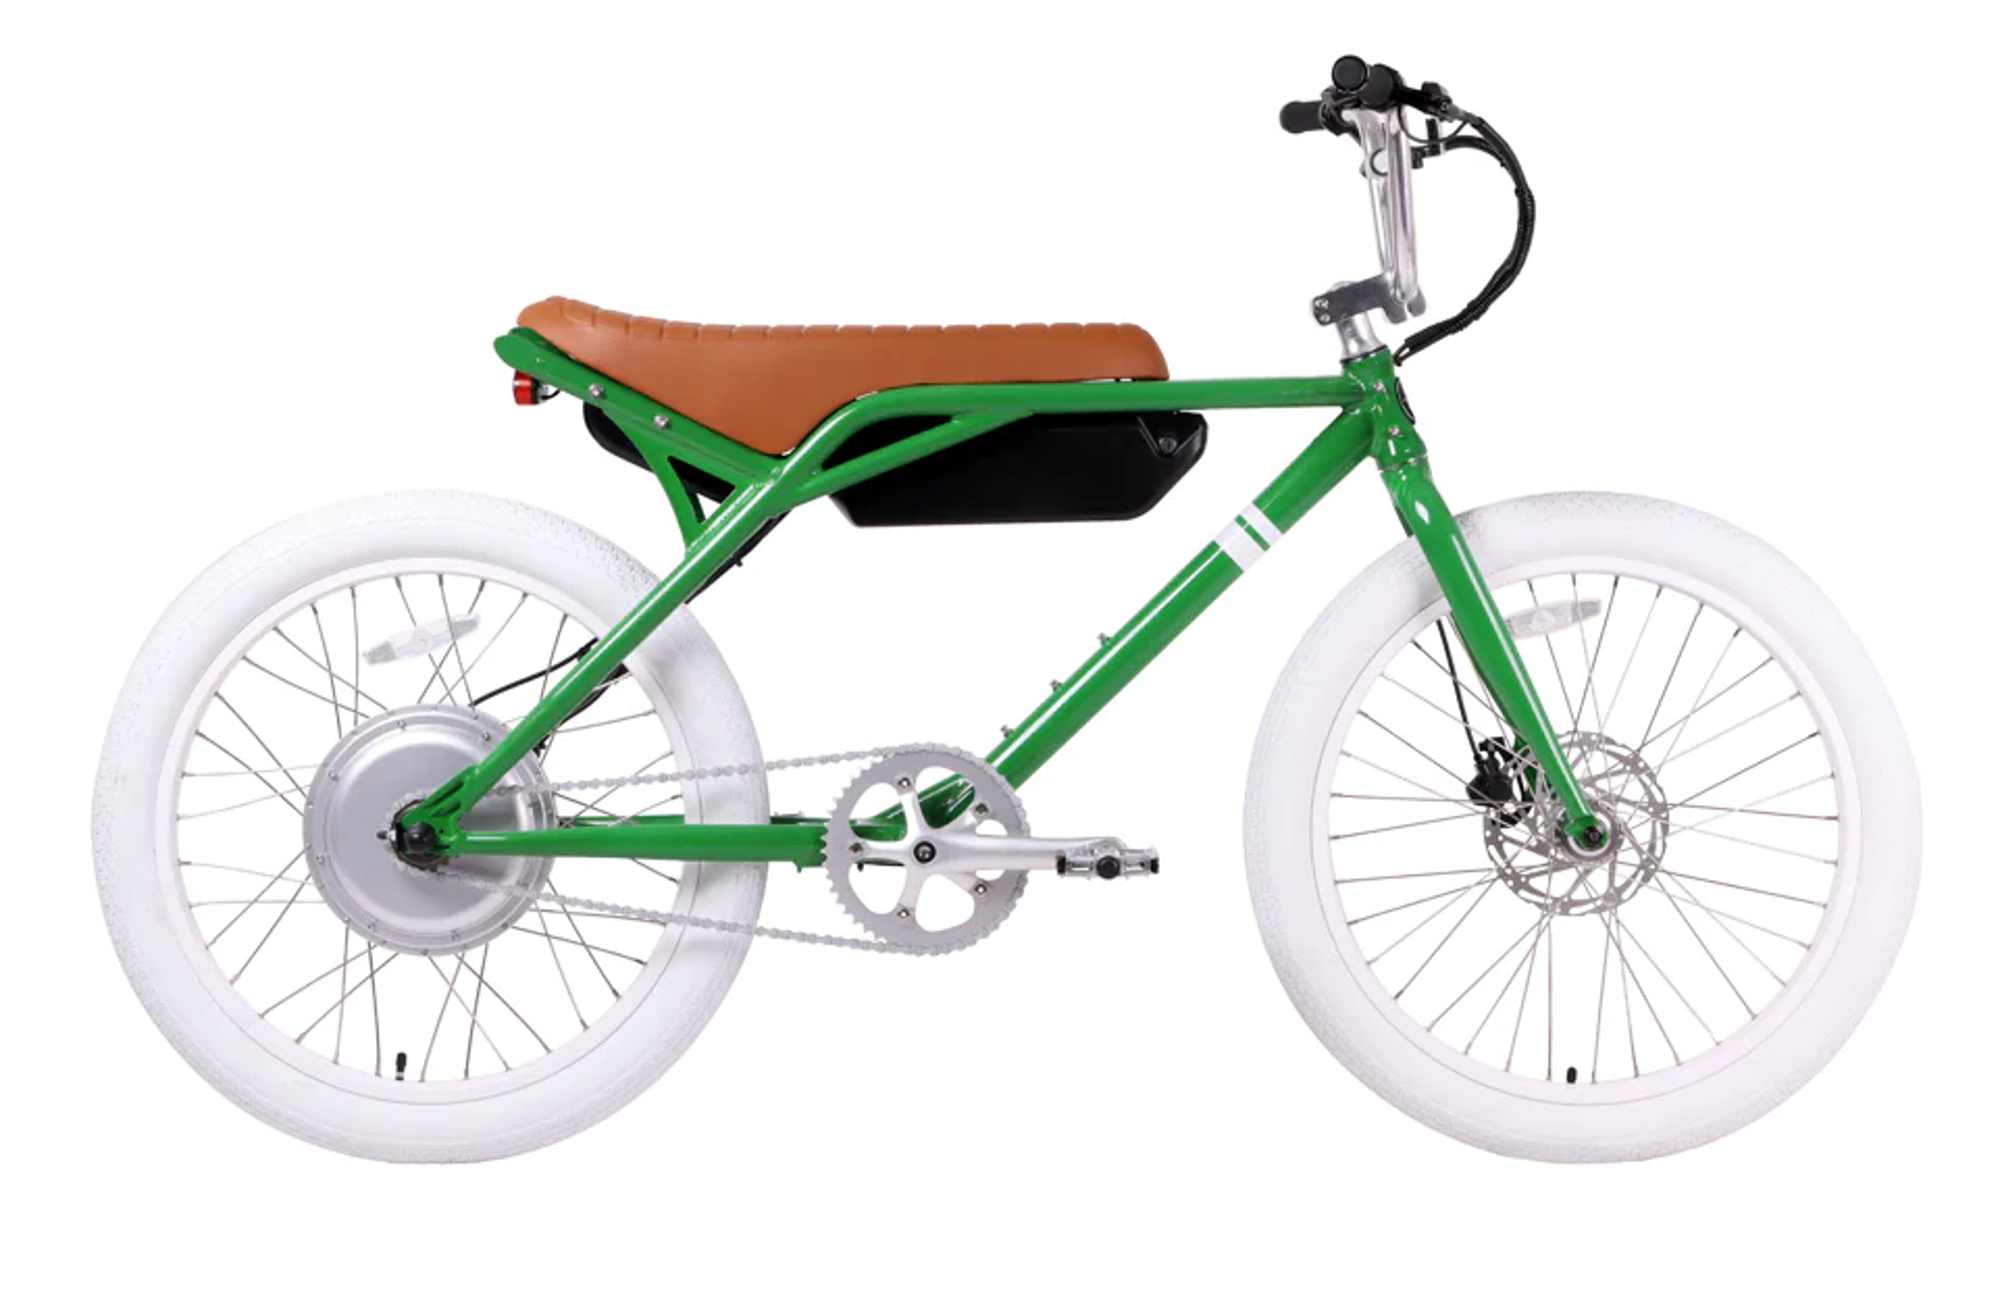 Sole e-24 electric bike in the Ballona colorway against a white background